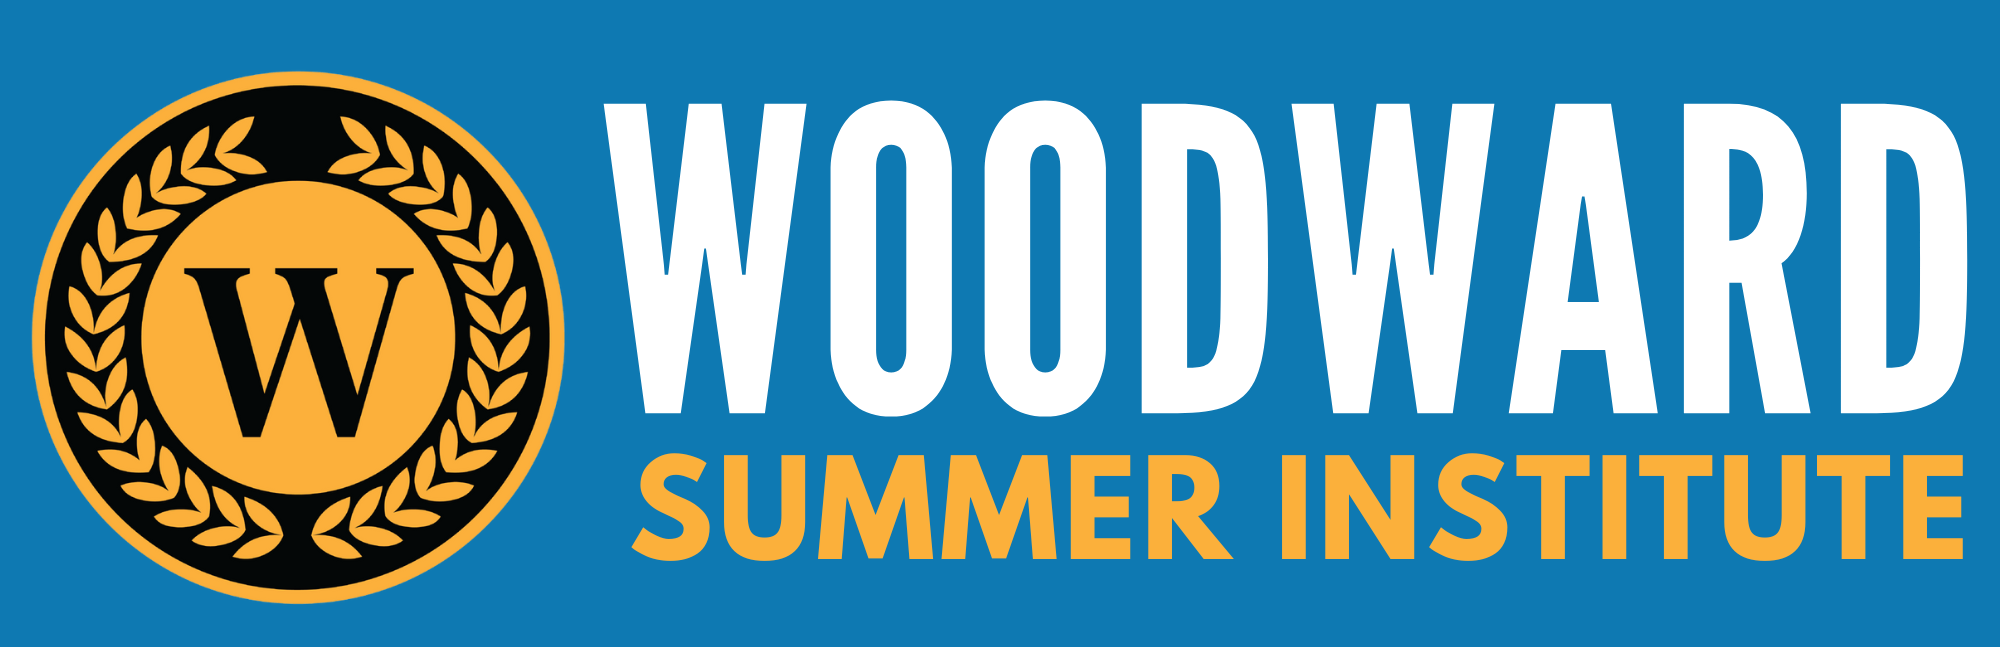 Woodward Summer Institute with link to register